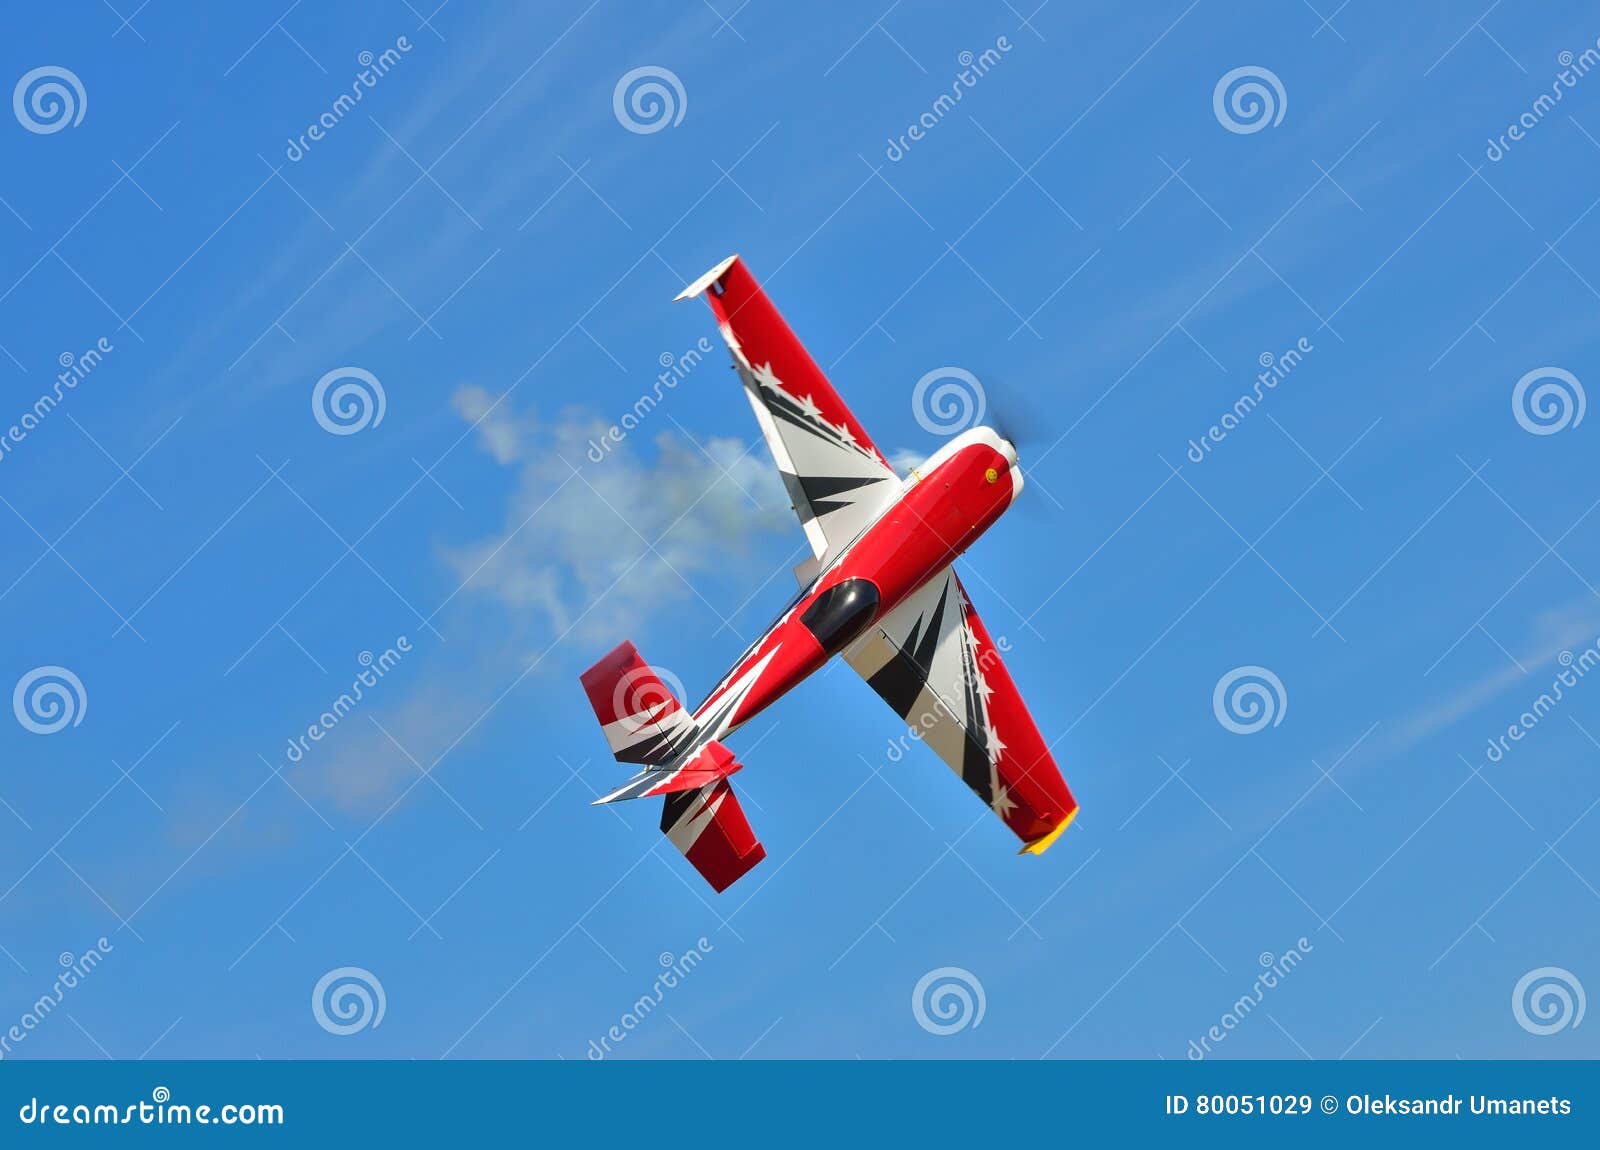 flying the plane performs aerobatics in the sky